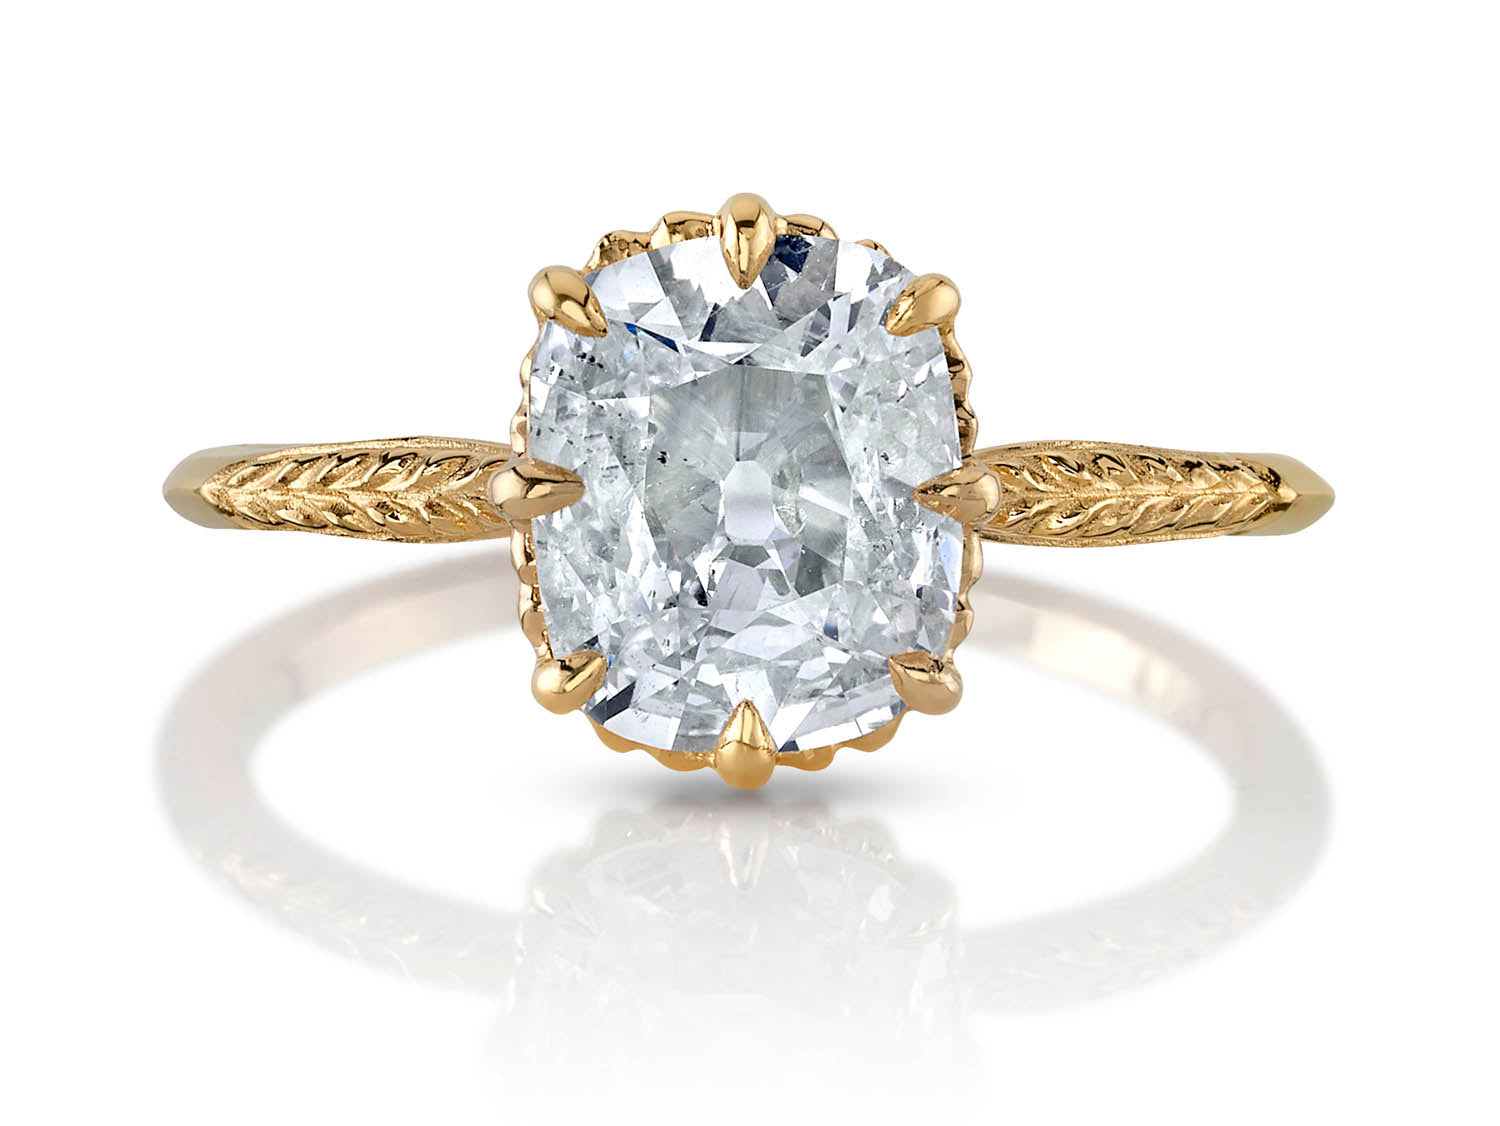 Arts & Crafts Movement Solitaire Old Mine Cut Diamond Ring | Bentley by Trumpet & Horn